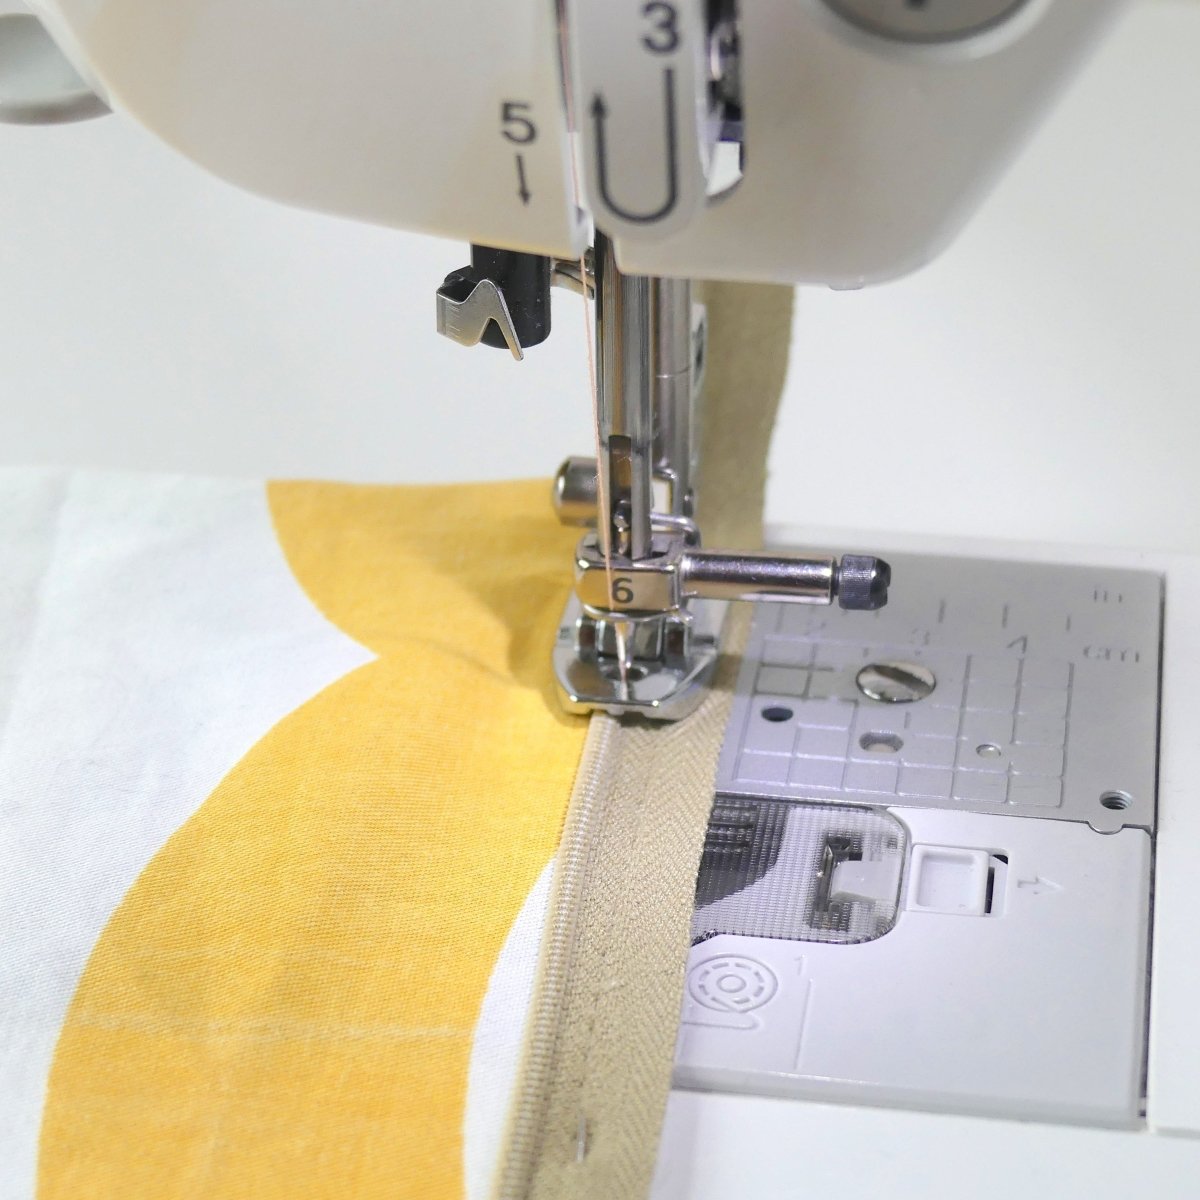 The Invisible Zipper Foot being used to sew an invisible zipper to a piece of fabric on the right.